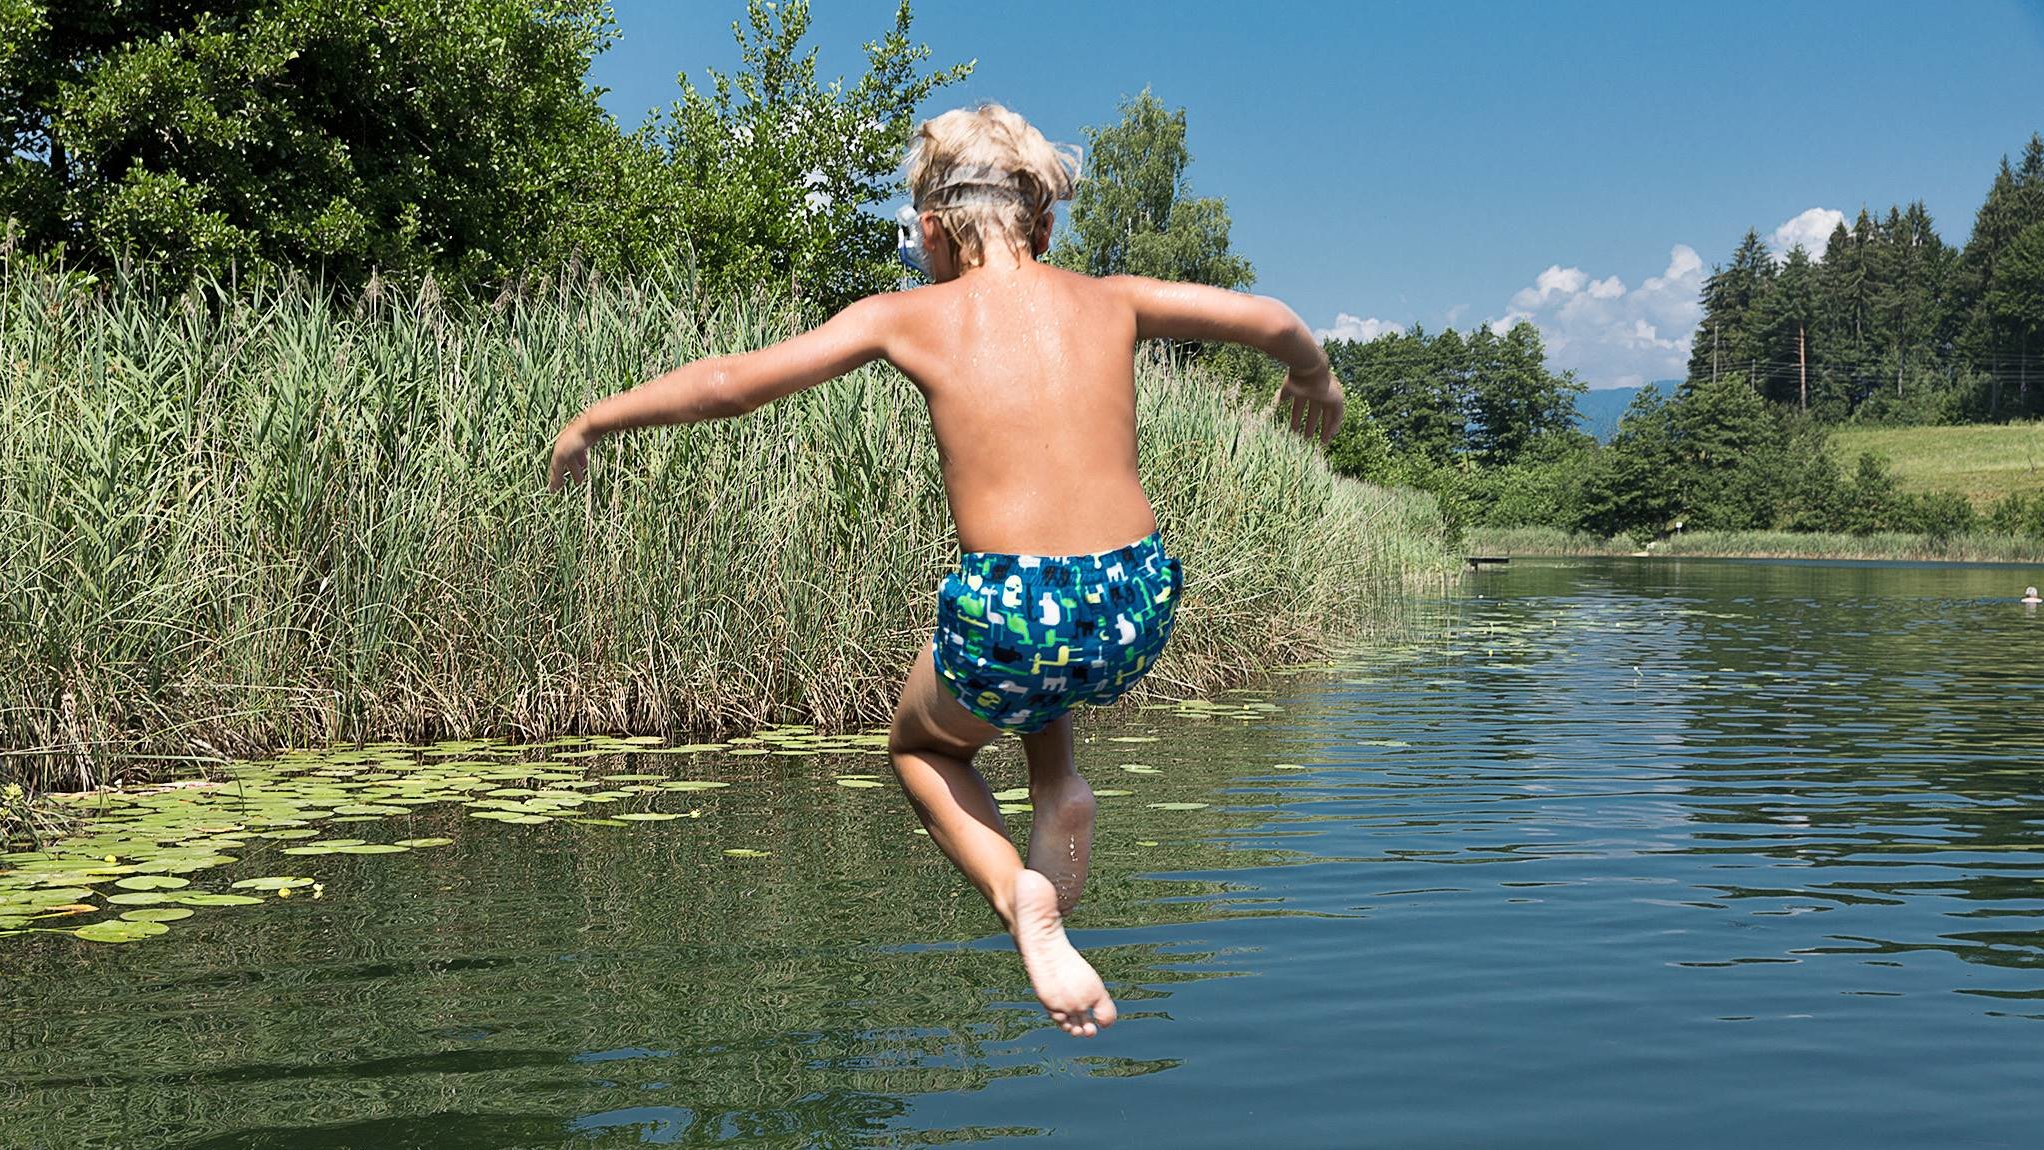 Child jumps into the refreshing water of Lake Aichwaldsee